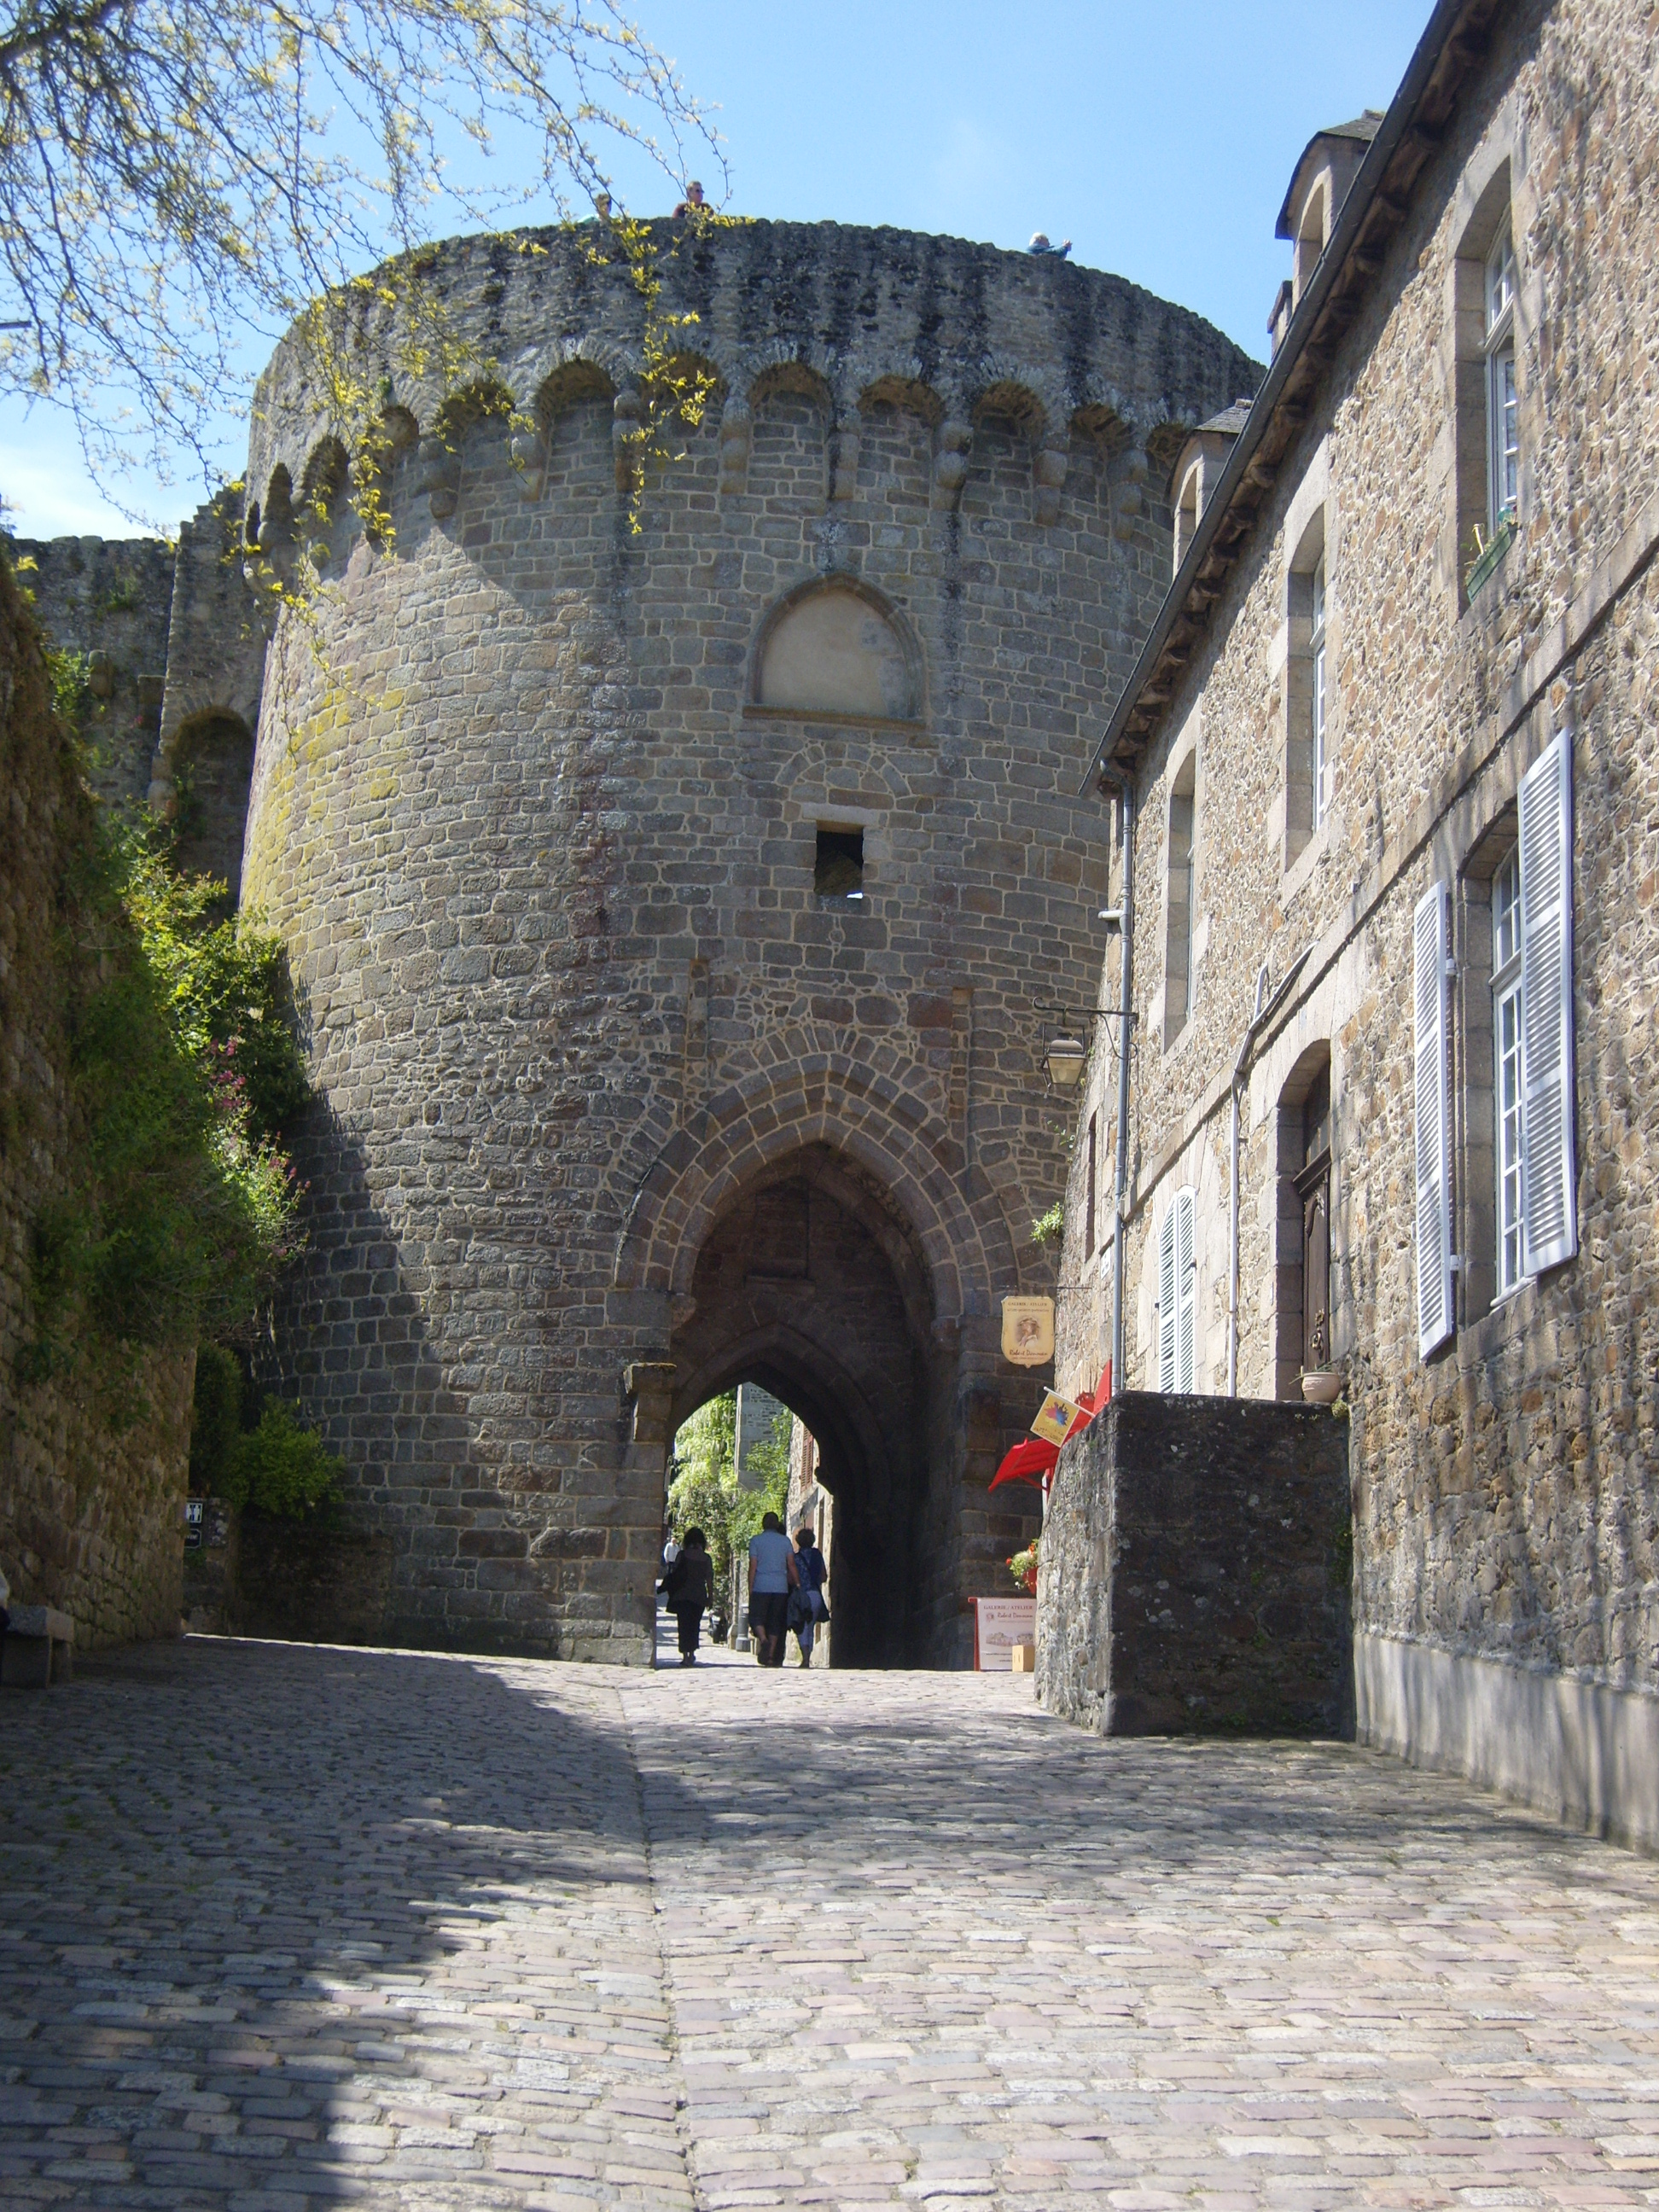 Dinan: My Favorite Place in Brittany